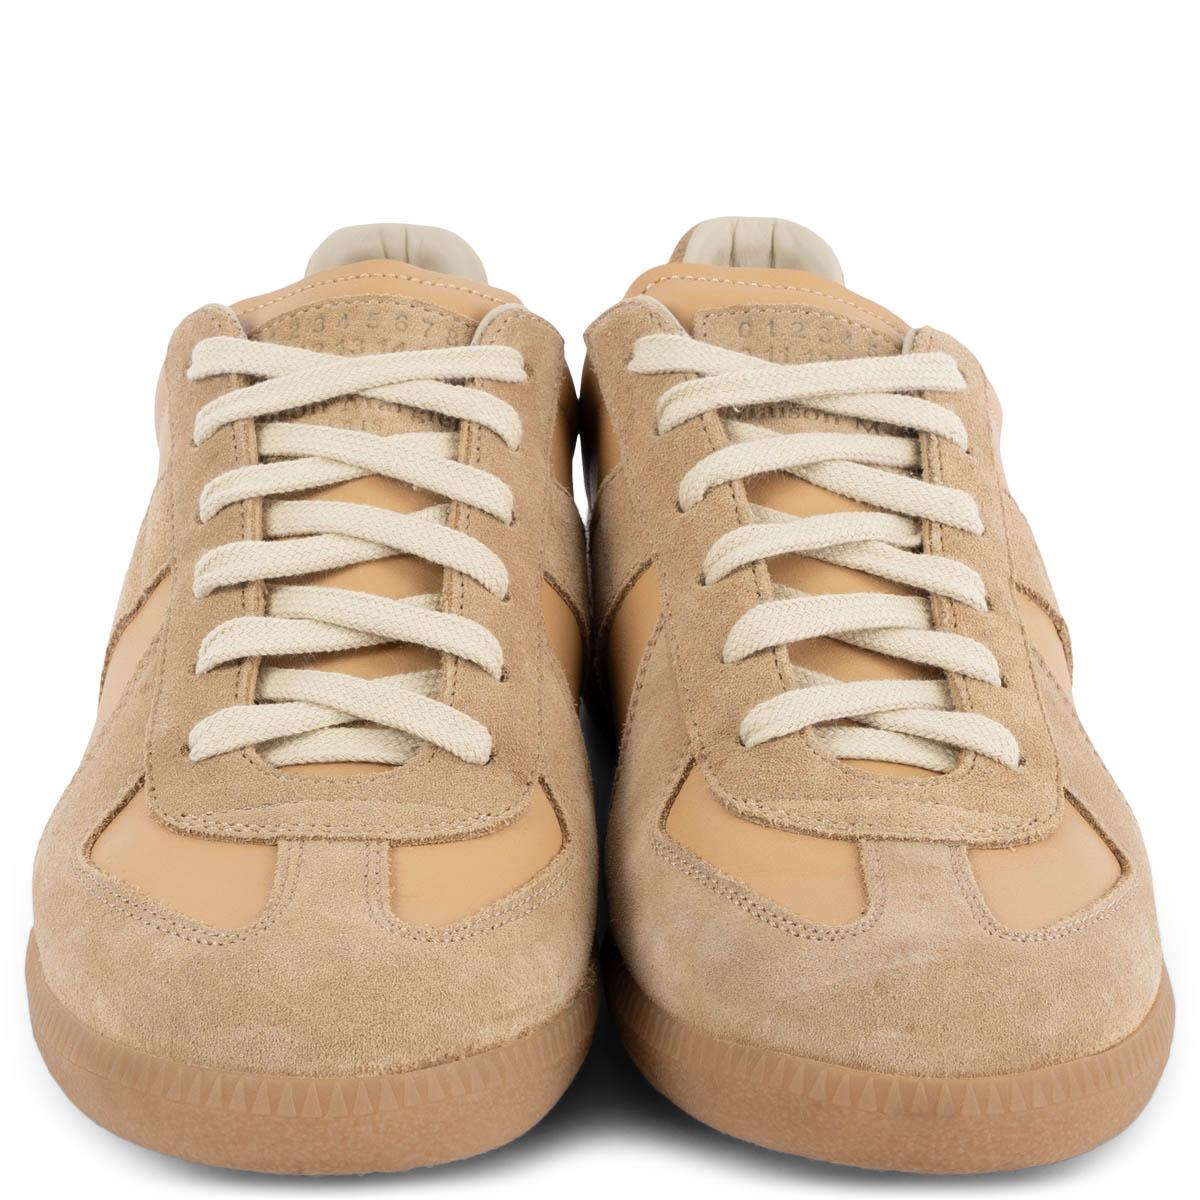 100% authentic Maison Martin Margiela Replica sneakers in beige lambskin and suede set on a beige rubber sole. Have been worn once inside and are in virtually new condition. 

Measurements
Imprinted Size	38
Shoe Size	38
Inside Sole	25cm